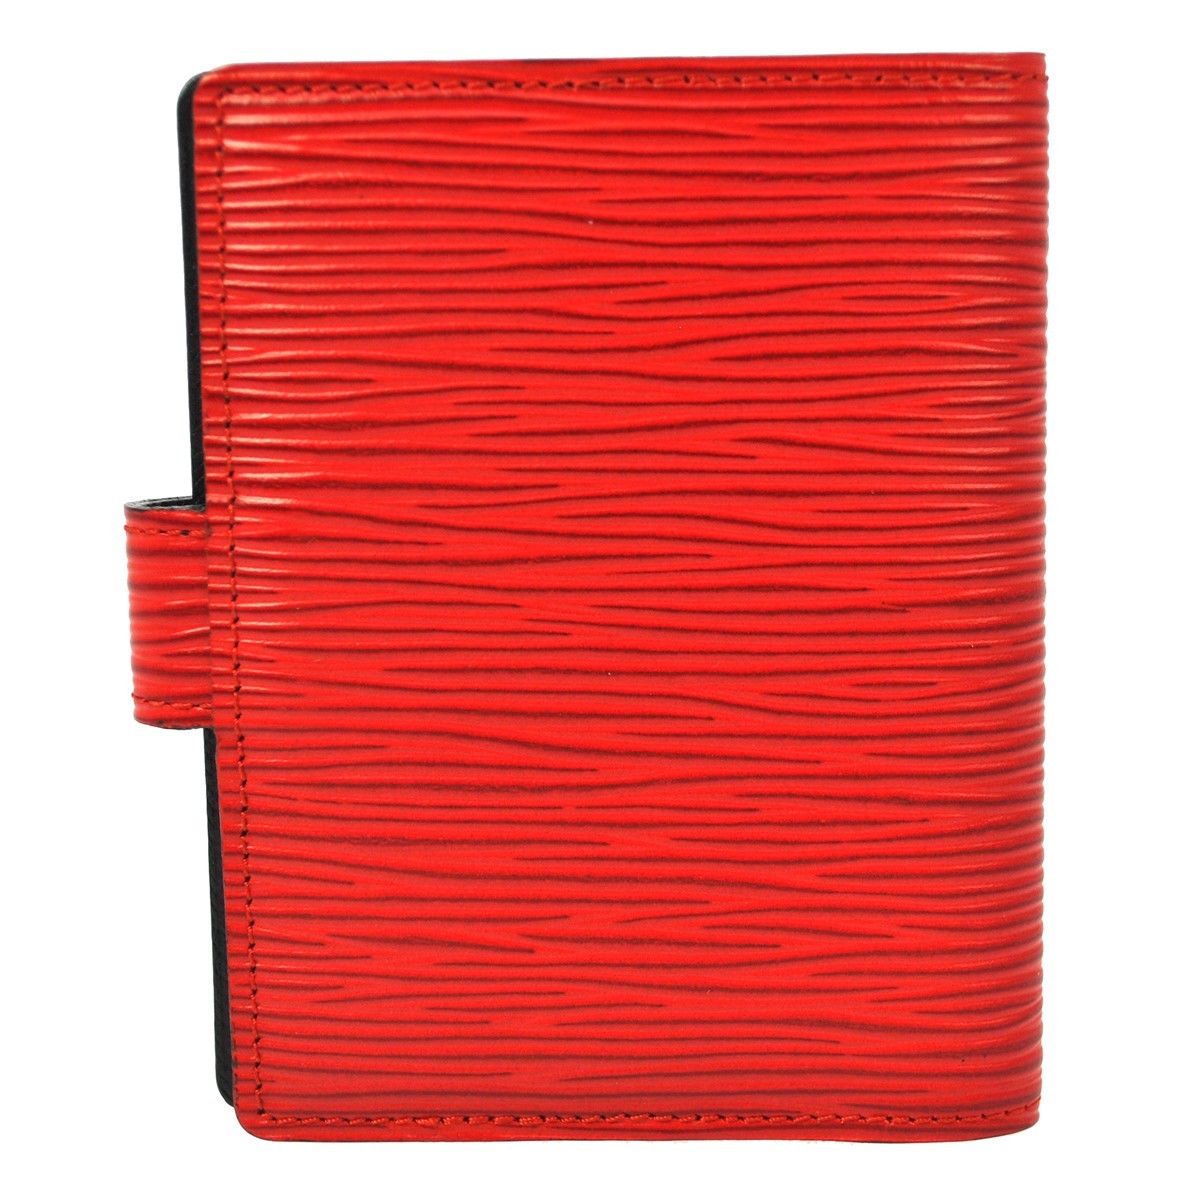 Sold at Auction: LOUIS VUITTON CARD HOLDER 3 SLOTS IN RED EPI LEATHER